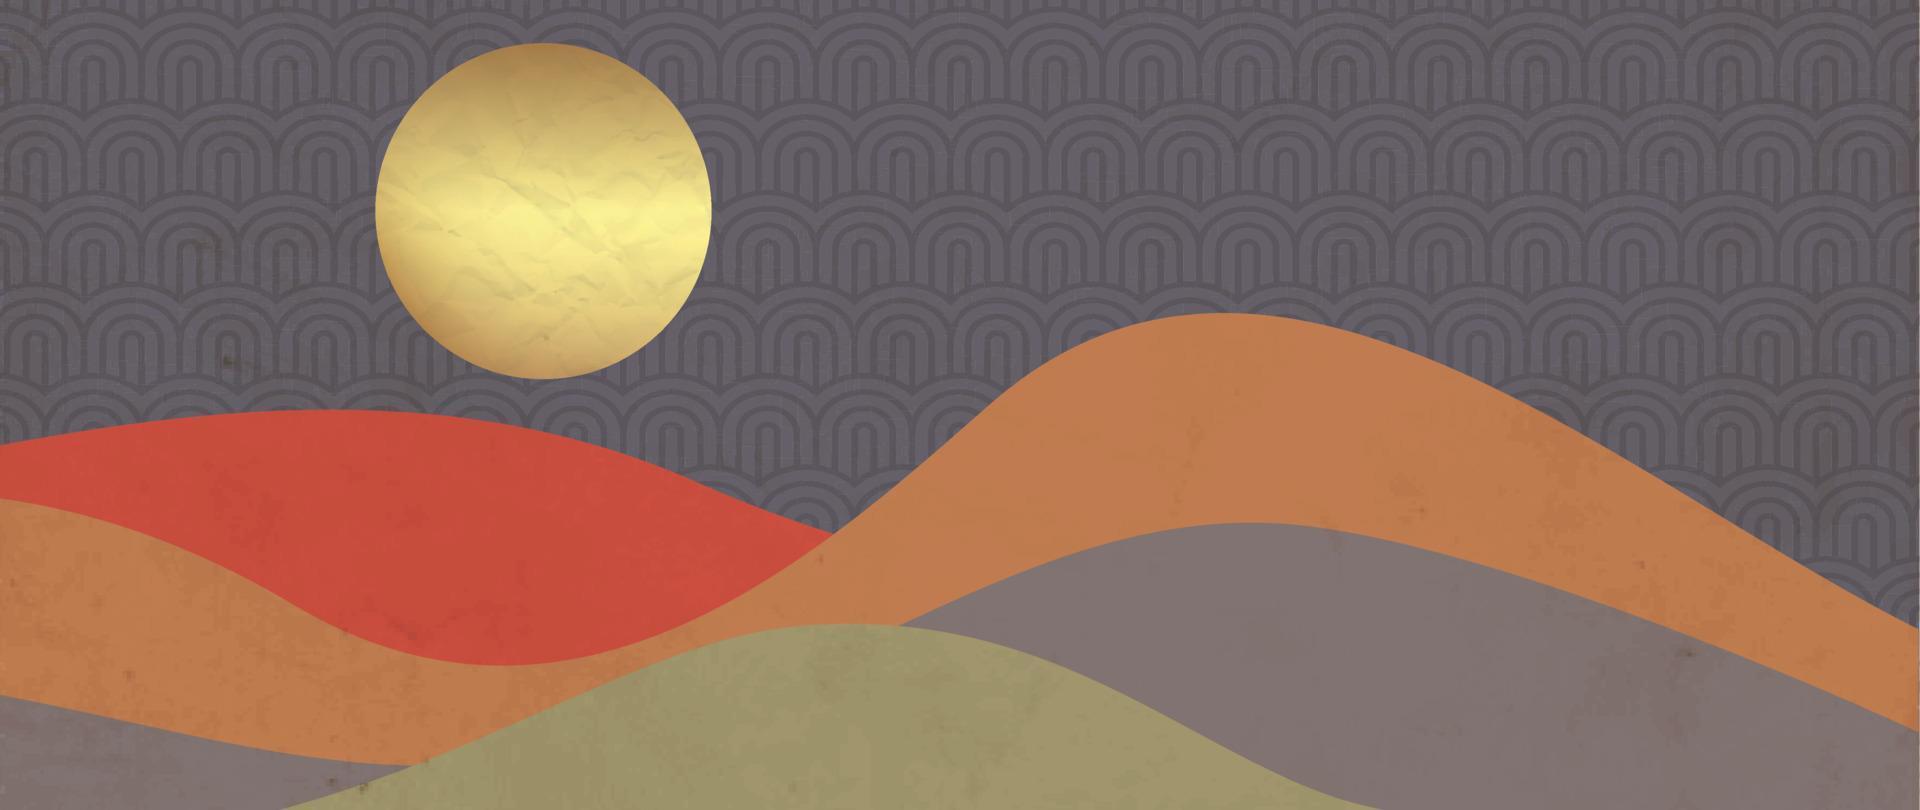 Mountains with line wave pattern and gold sun, japanese style vector